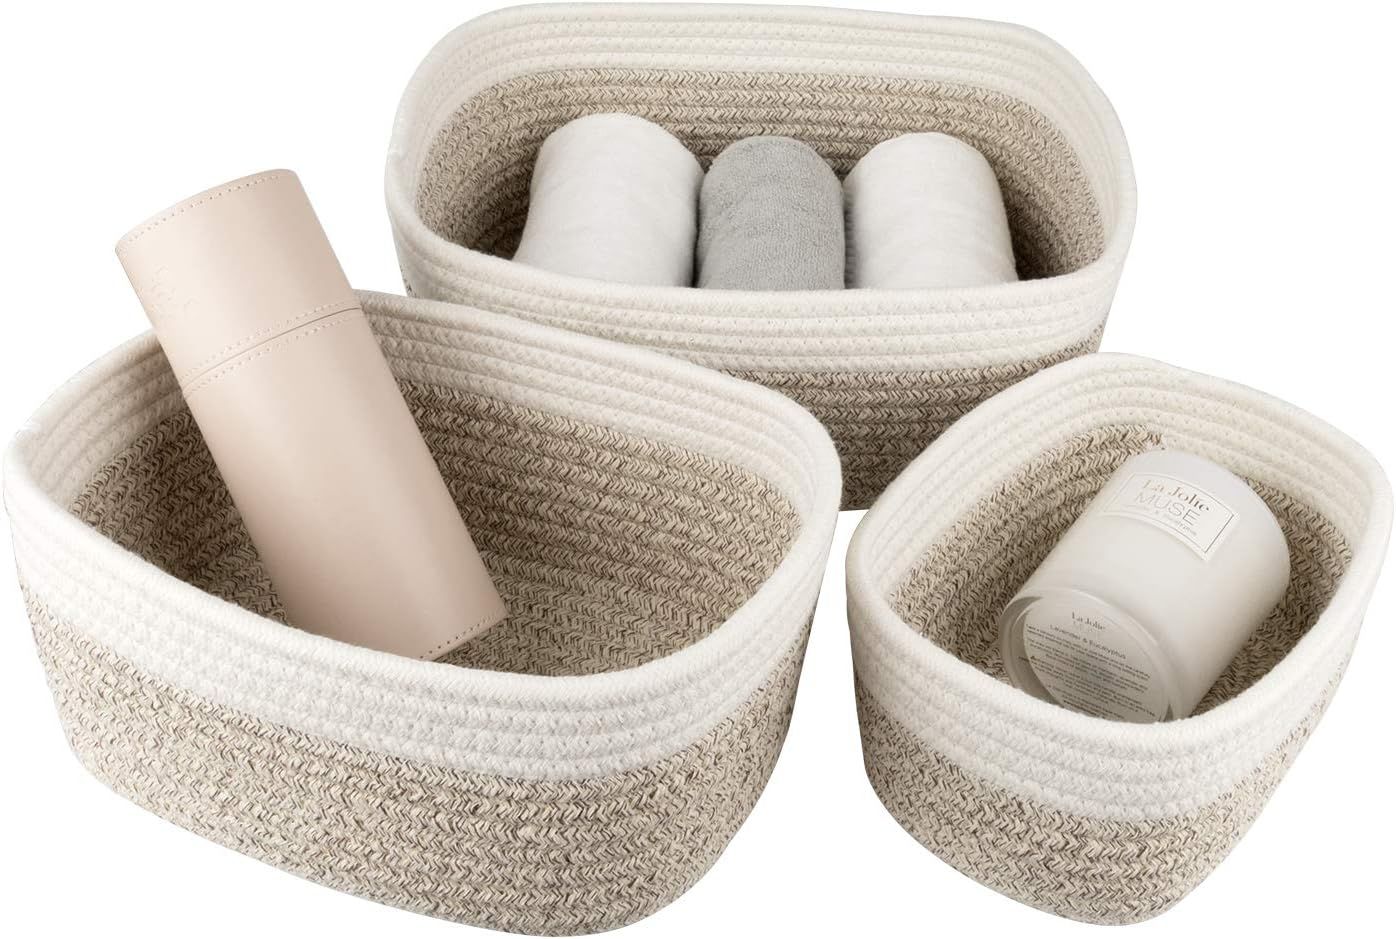 LA JOLIE MUSE Rope Storage Baskets for Organizing, Small Cotton Woven Basket for Bathroom Shelve ... | Amazon (US)